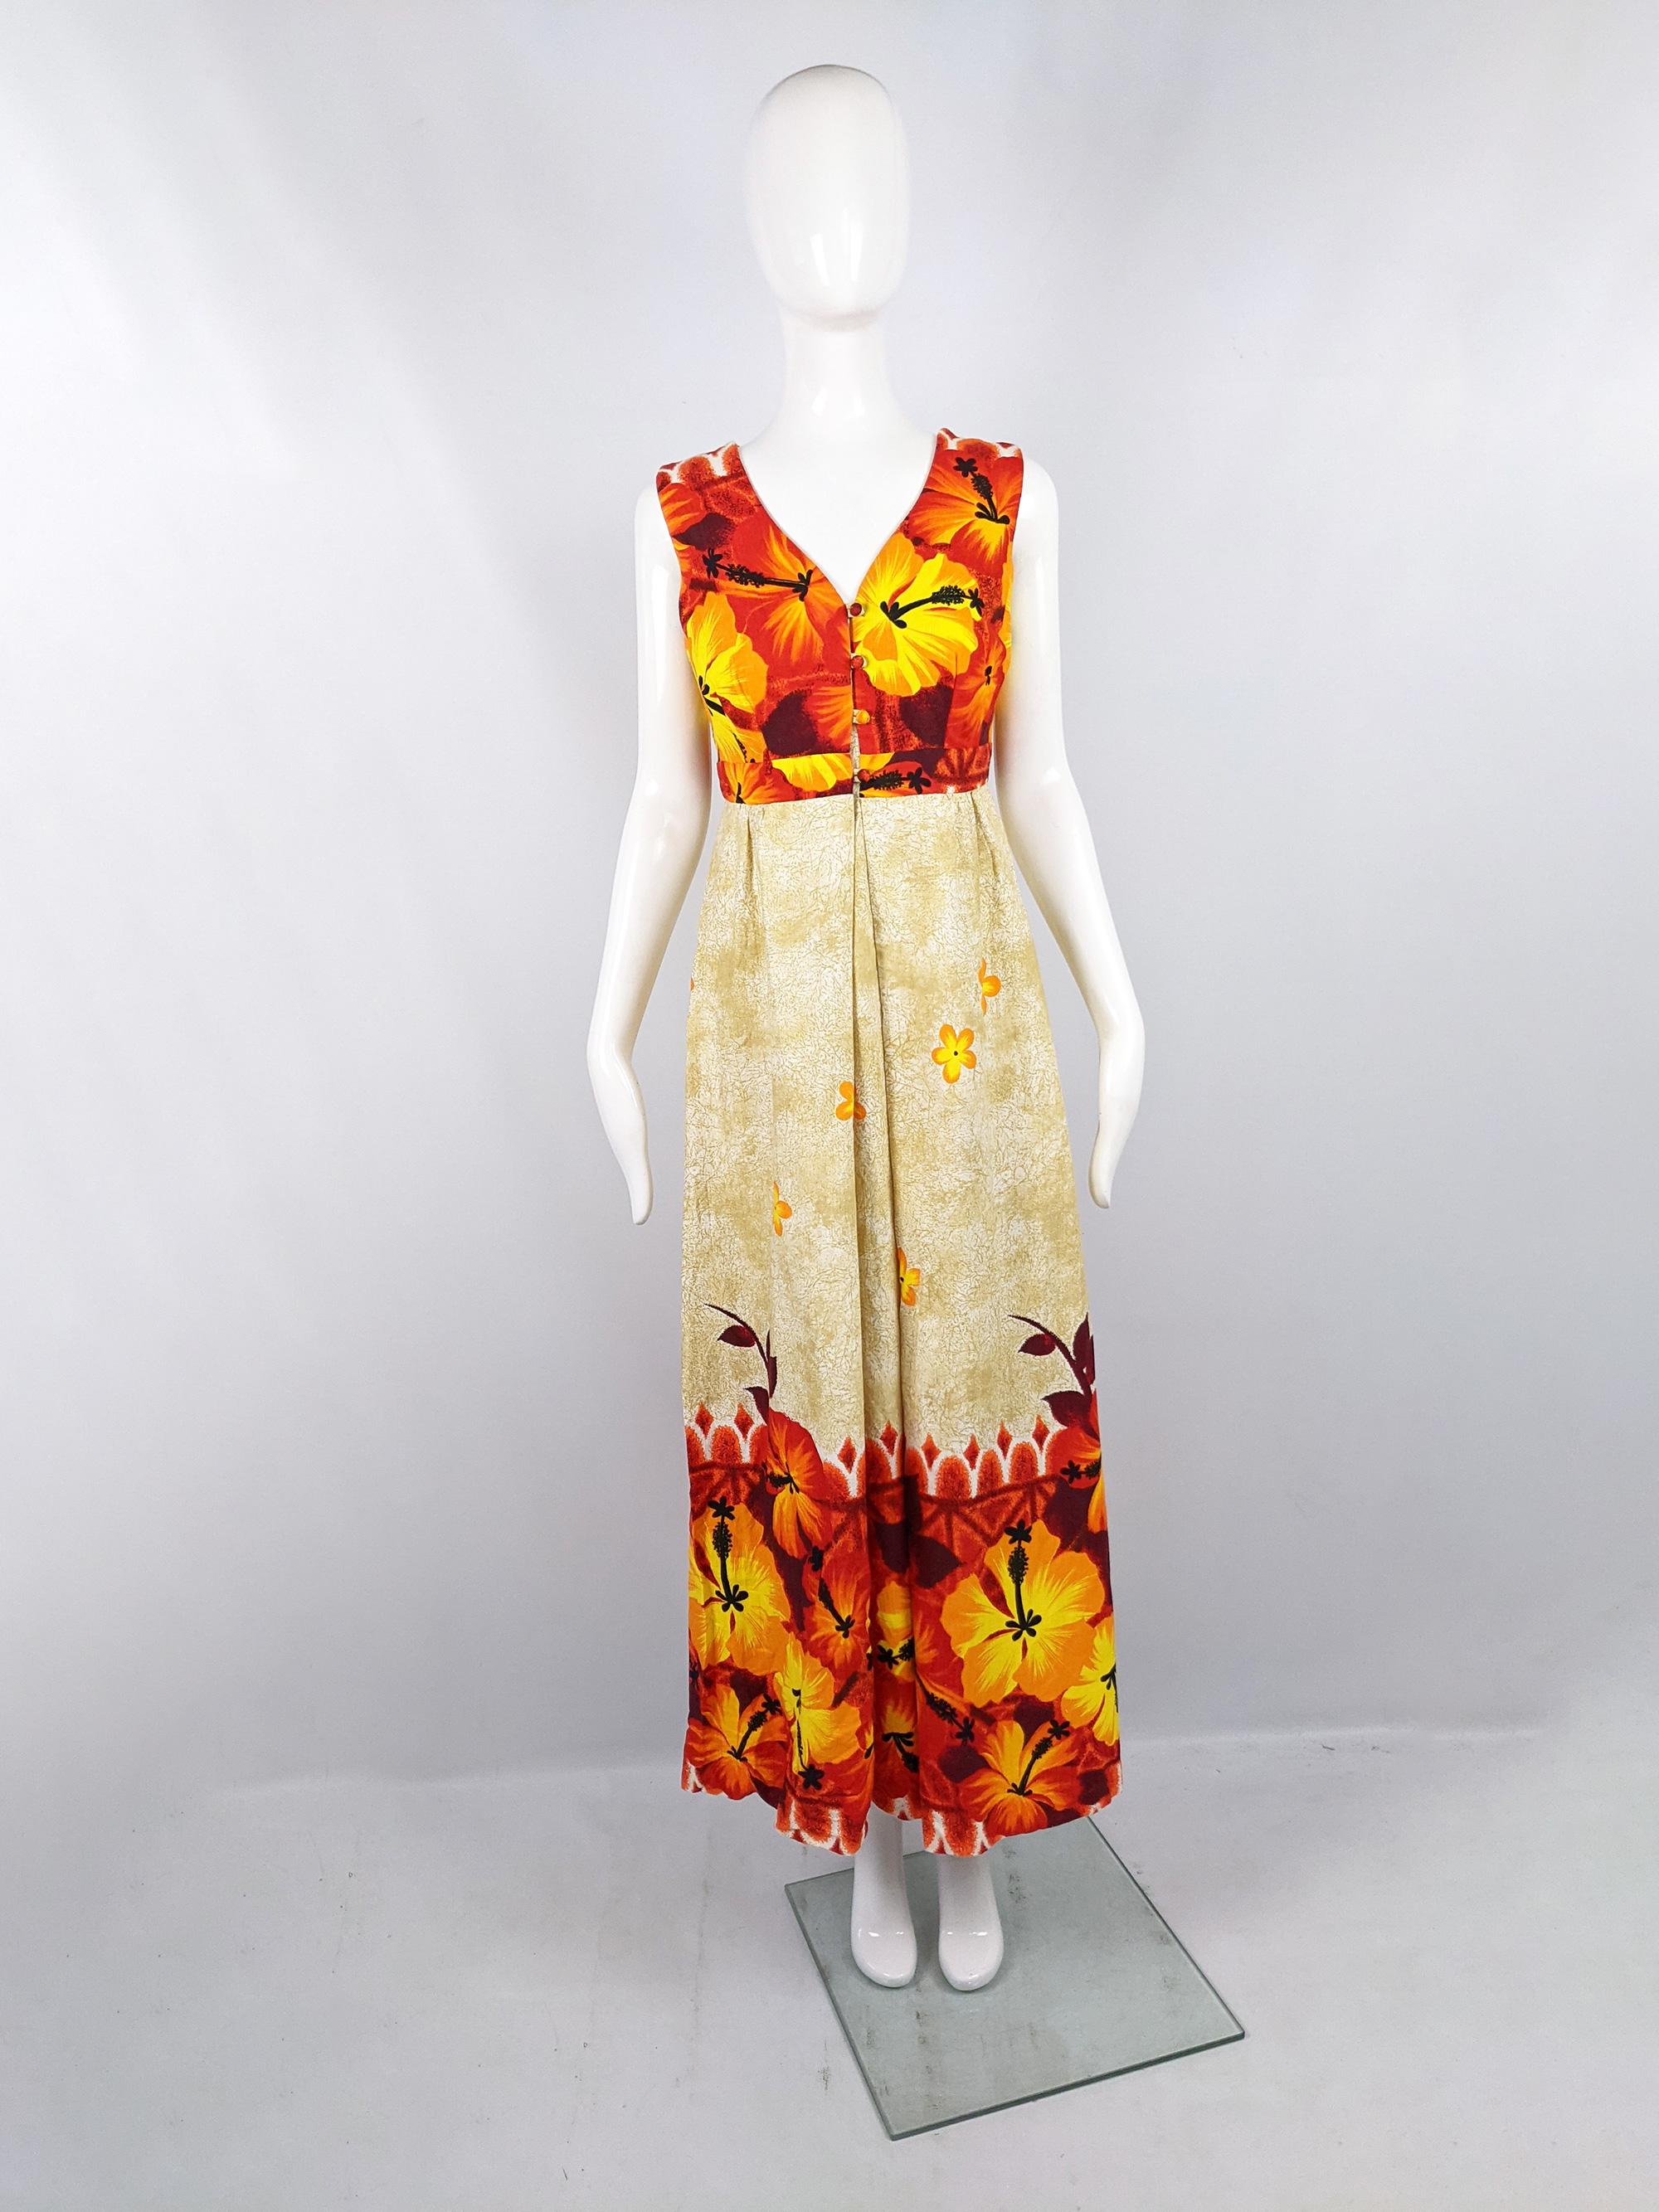 A stunning and rare vintage womens sleeveless maxi dress from the 60s by Hawaiian label, Island Casuals. In an orange, yellow and cream tropical cotton fabric with a deep v neckline. Perfect for a summer vacation.

Size: Marked vintage 12 but